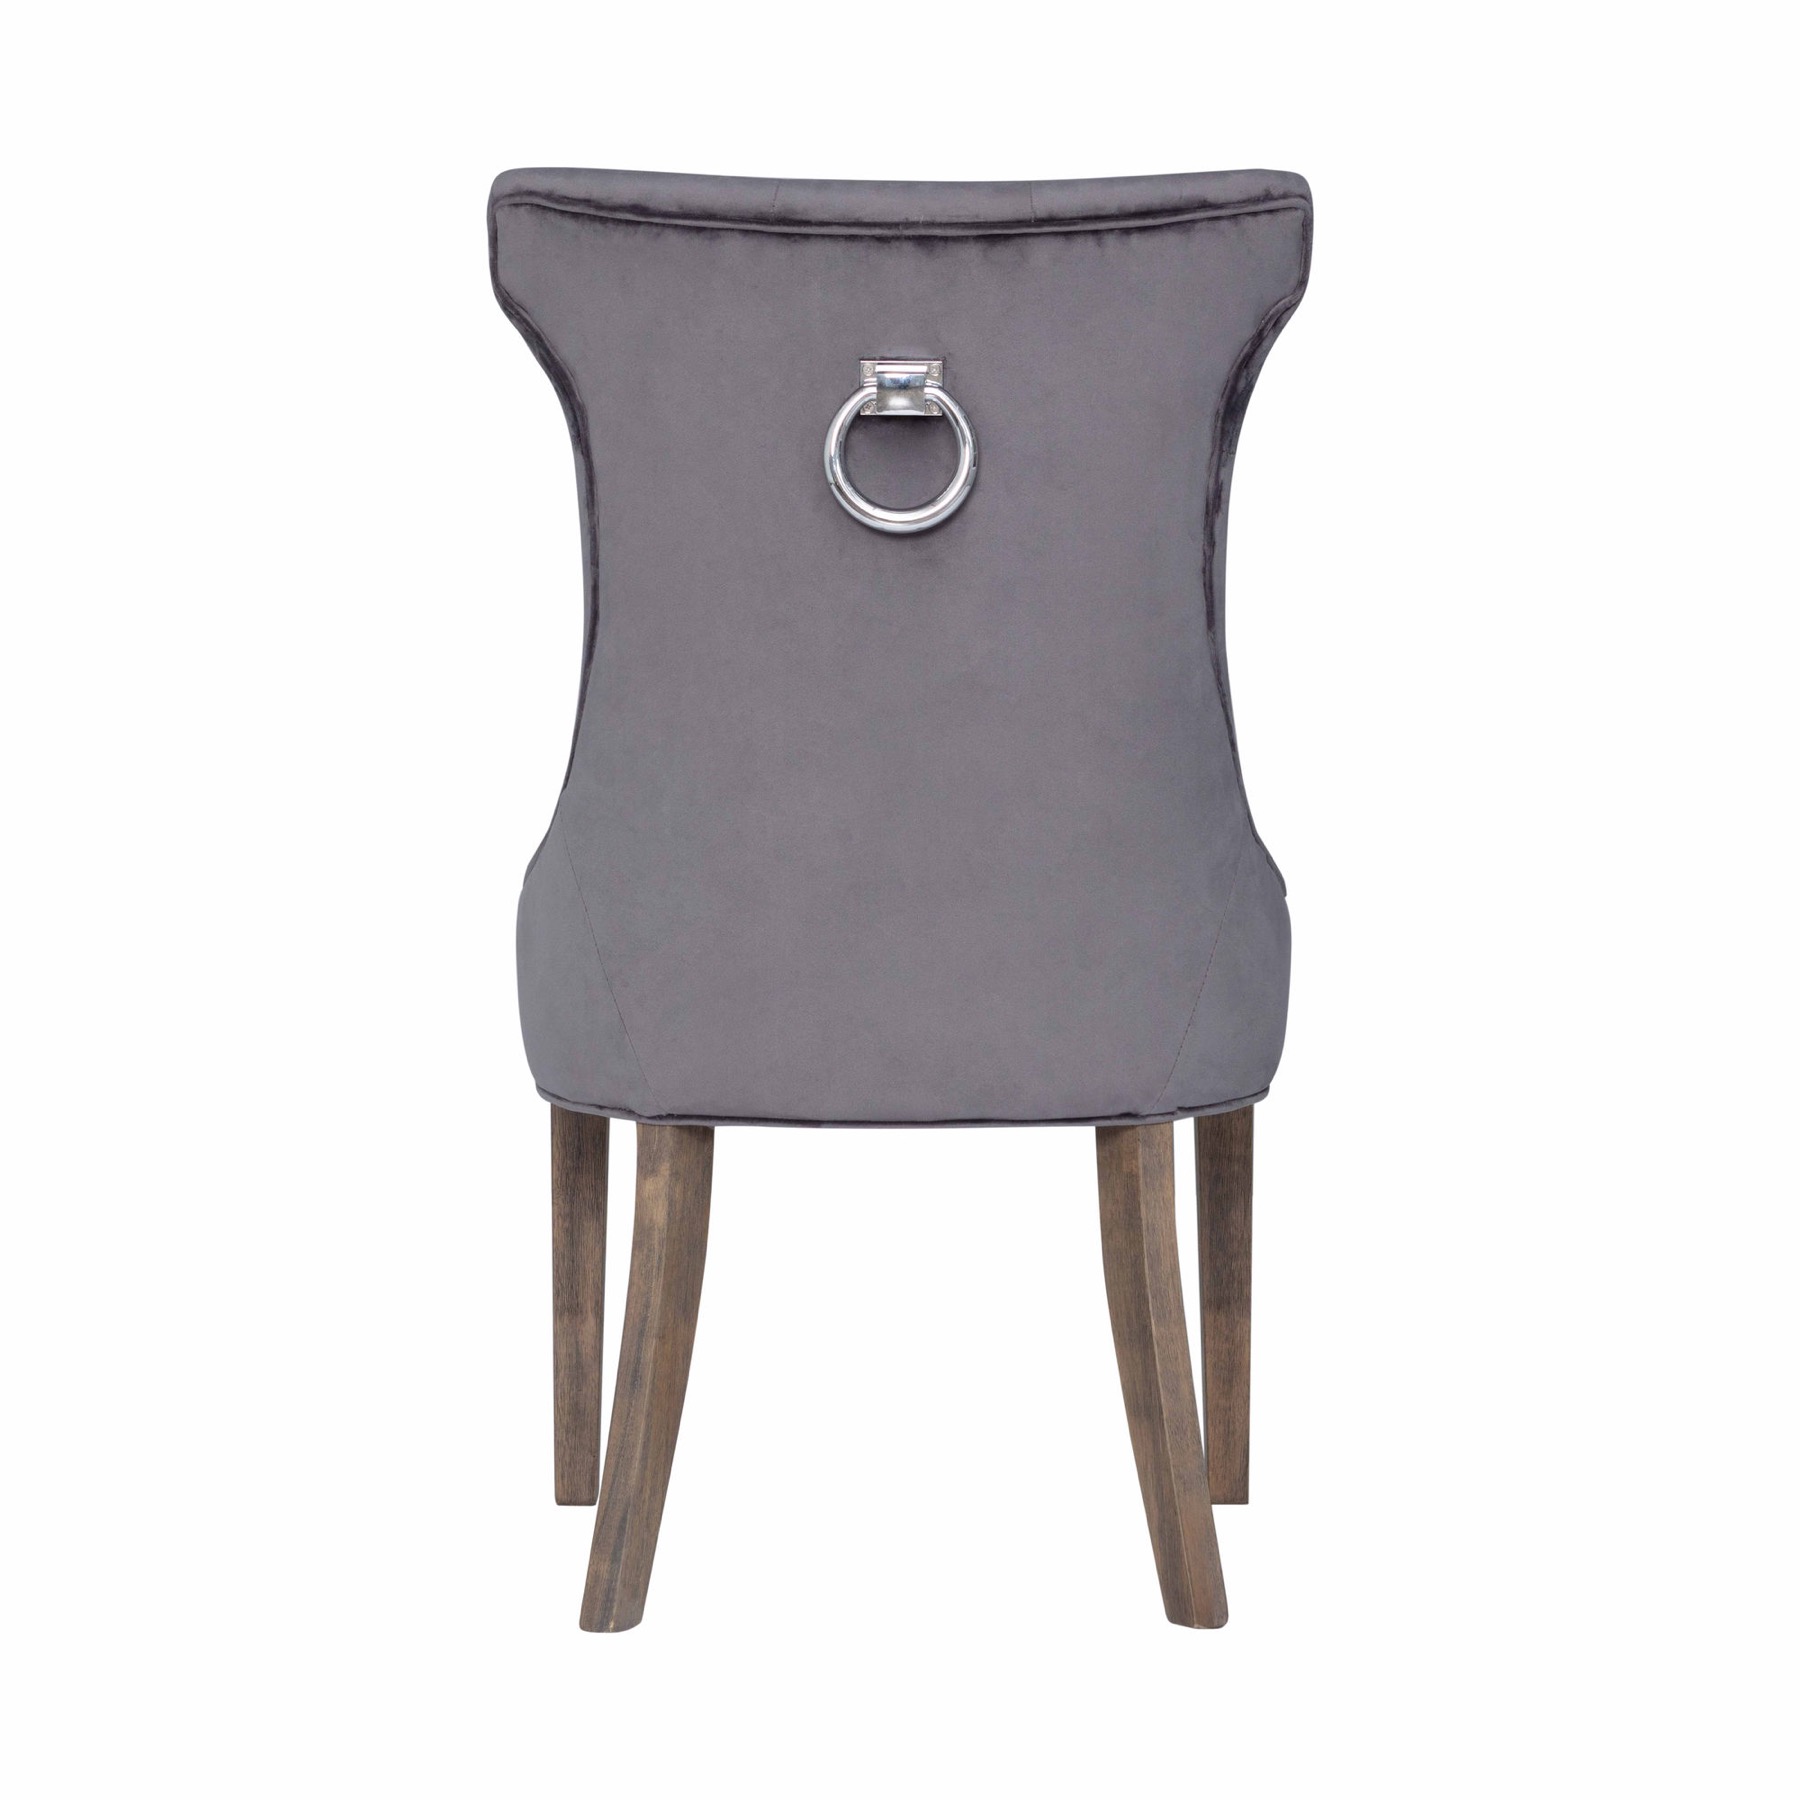 Knightsbridge High Wing Ring Backed Dining Chair - Image 5